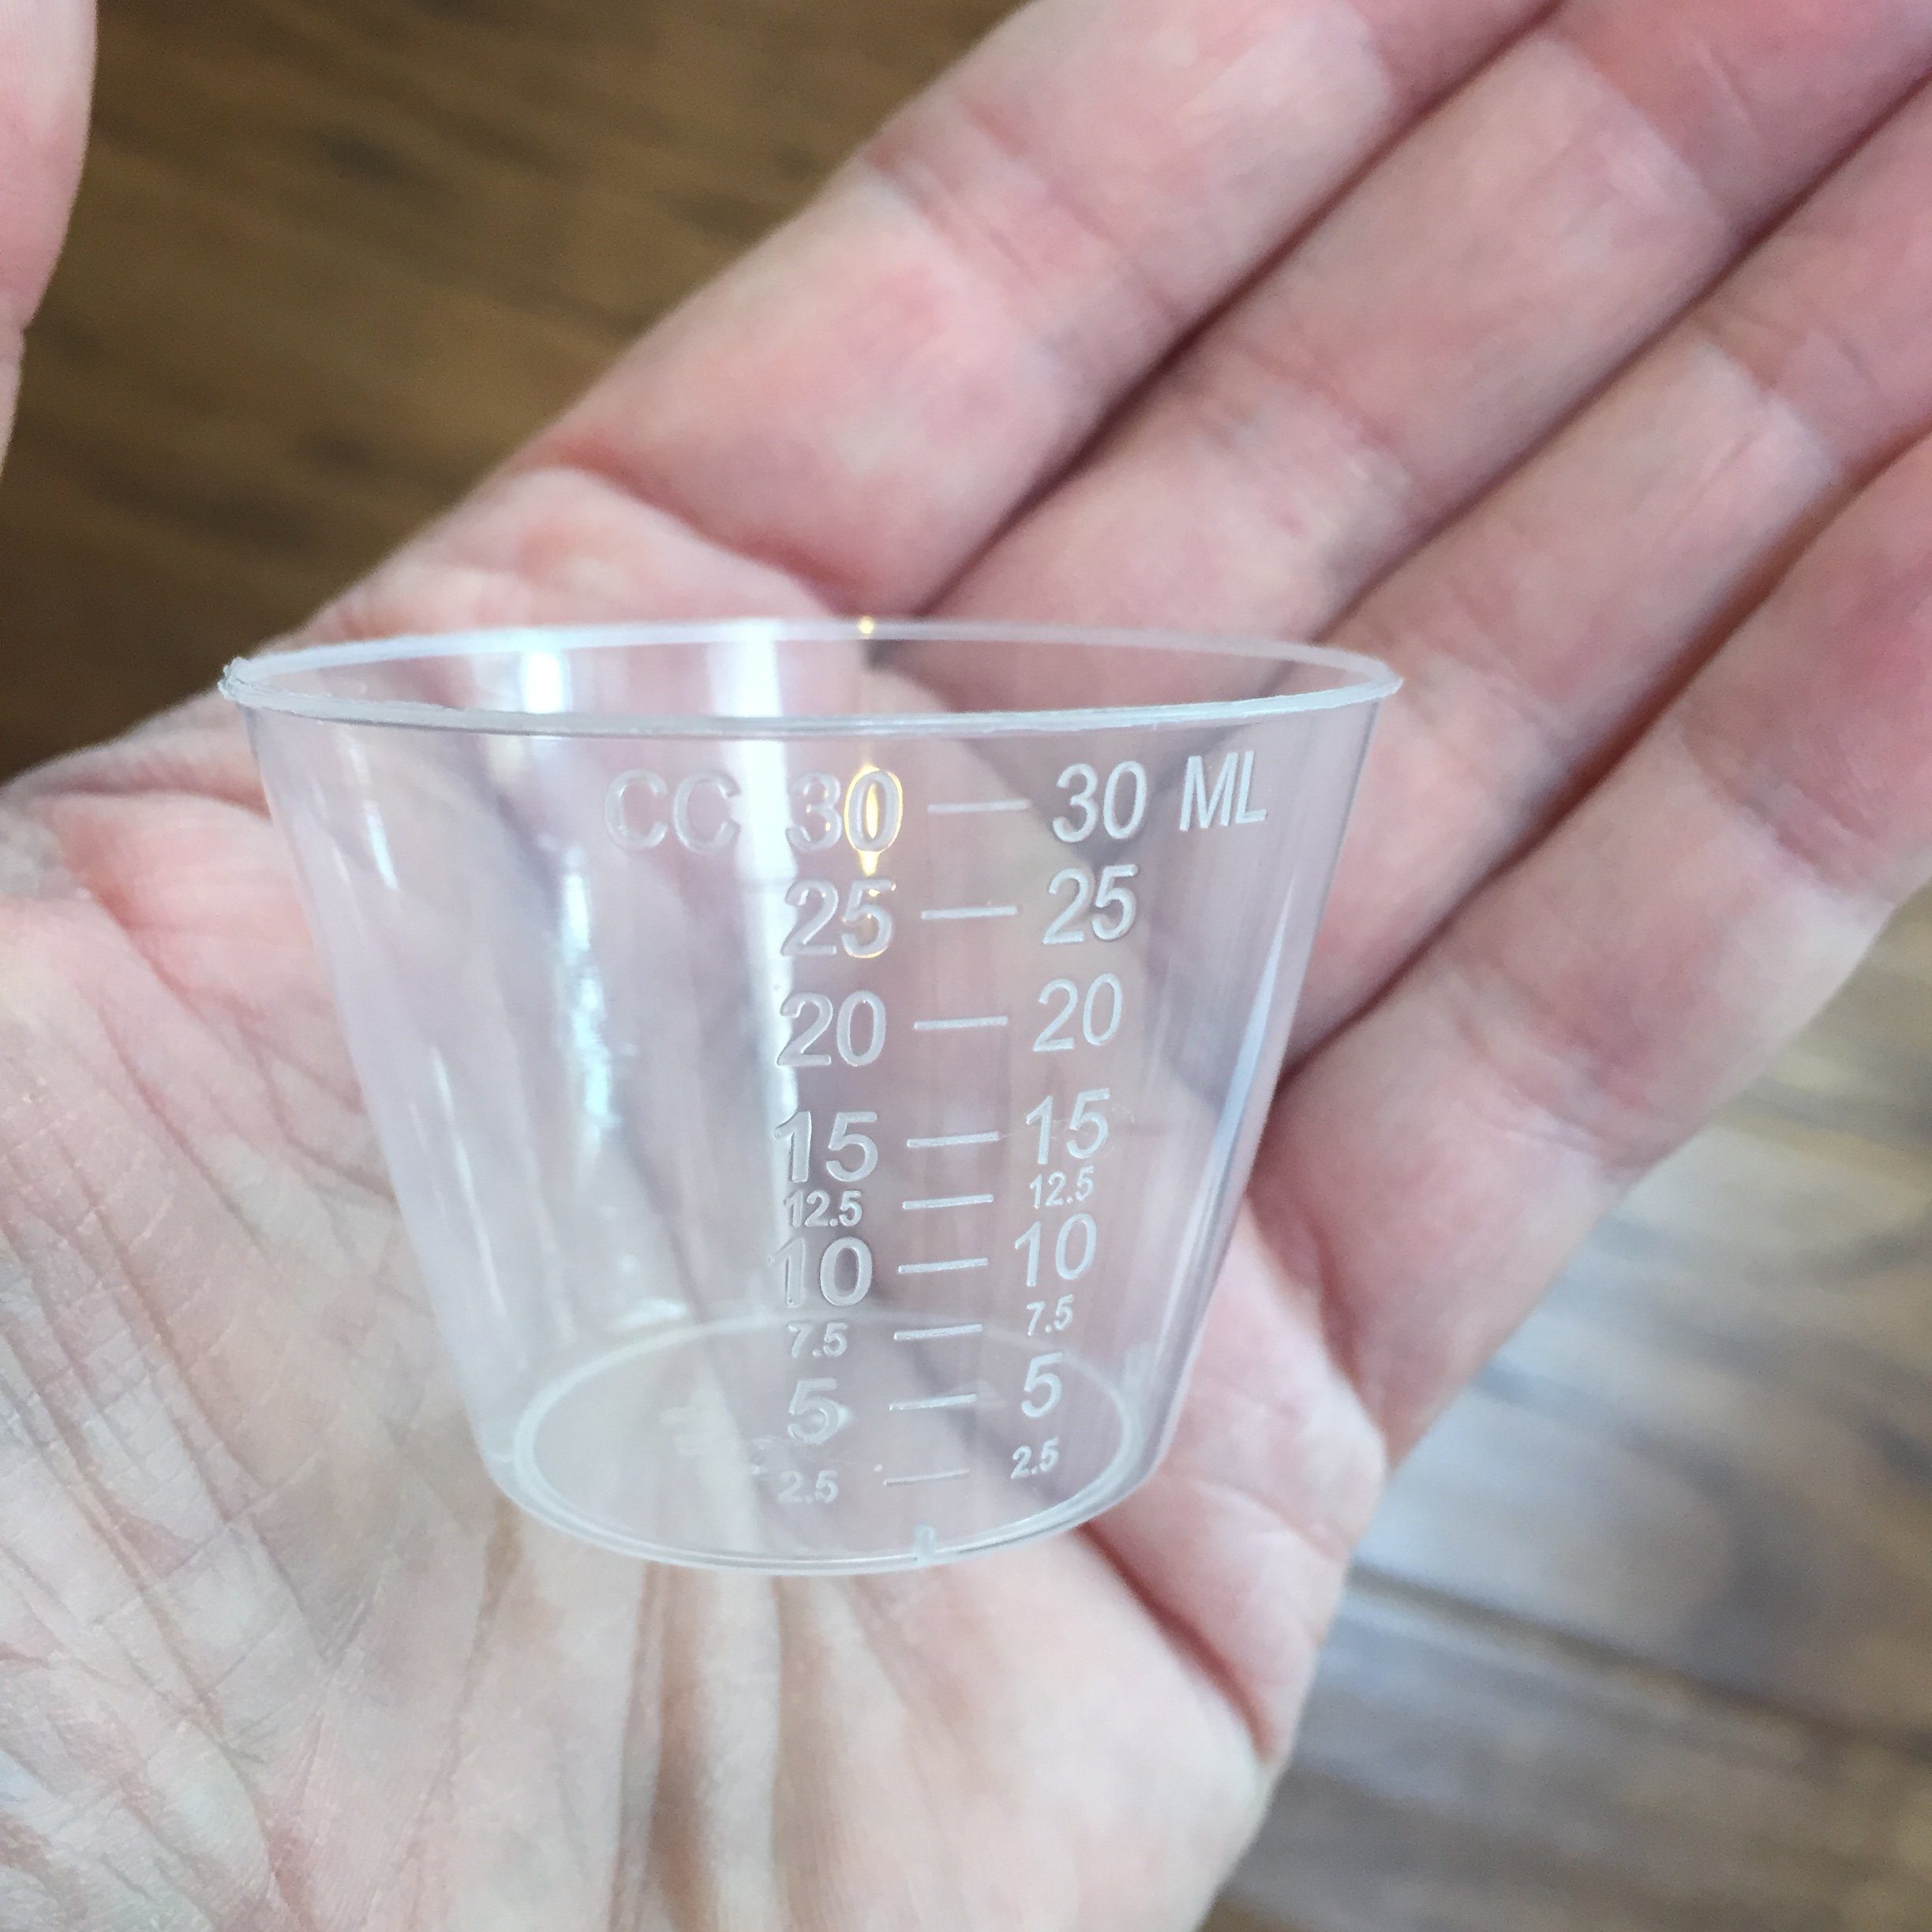 Small Plastic Mixing Cups For Resin 1 oz - Pack of 20